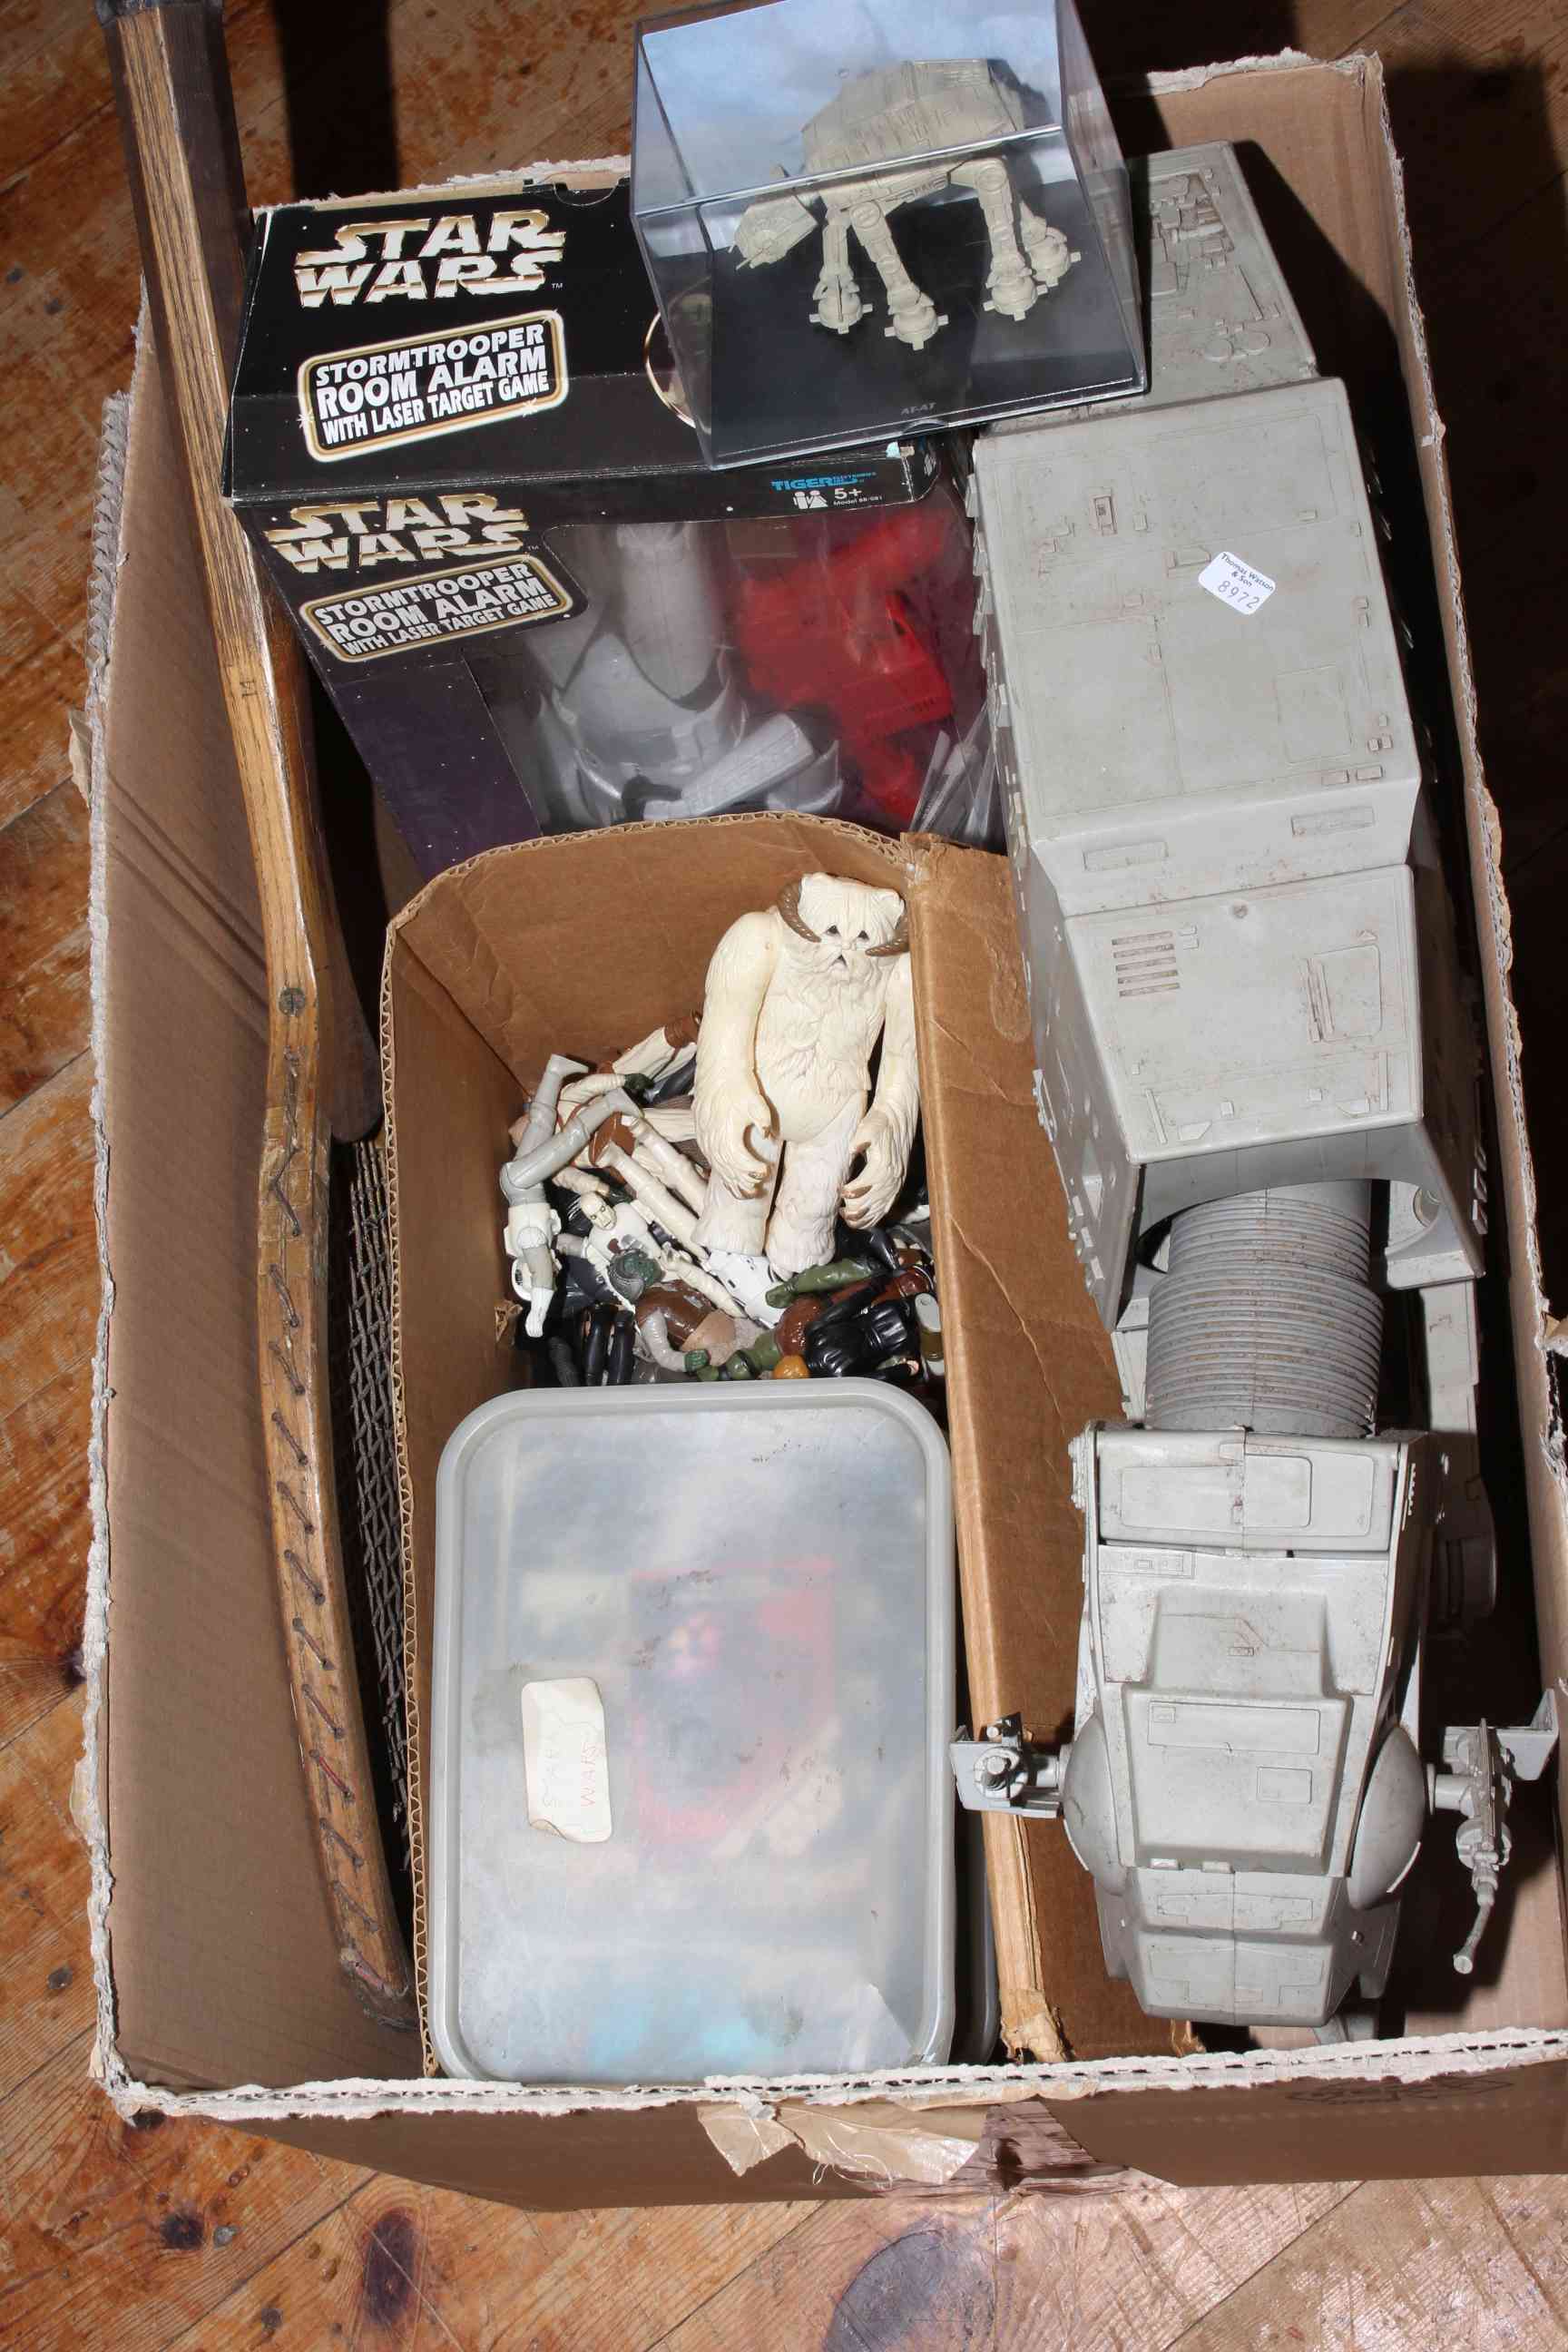 Collection of Star Wars toys including Return of the Jedi, Millennium Falcon, Storm Trooper in case, - Image 2 of 3